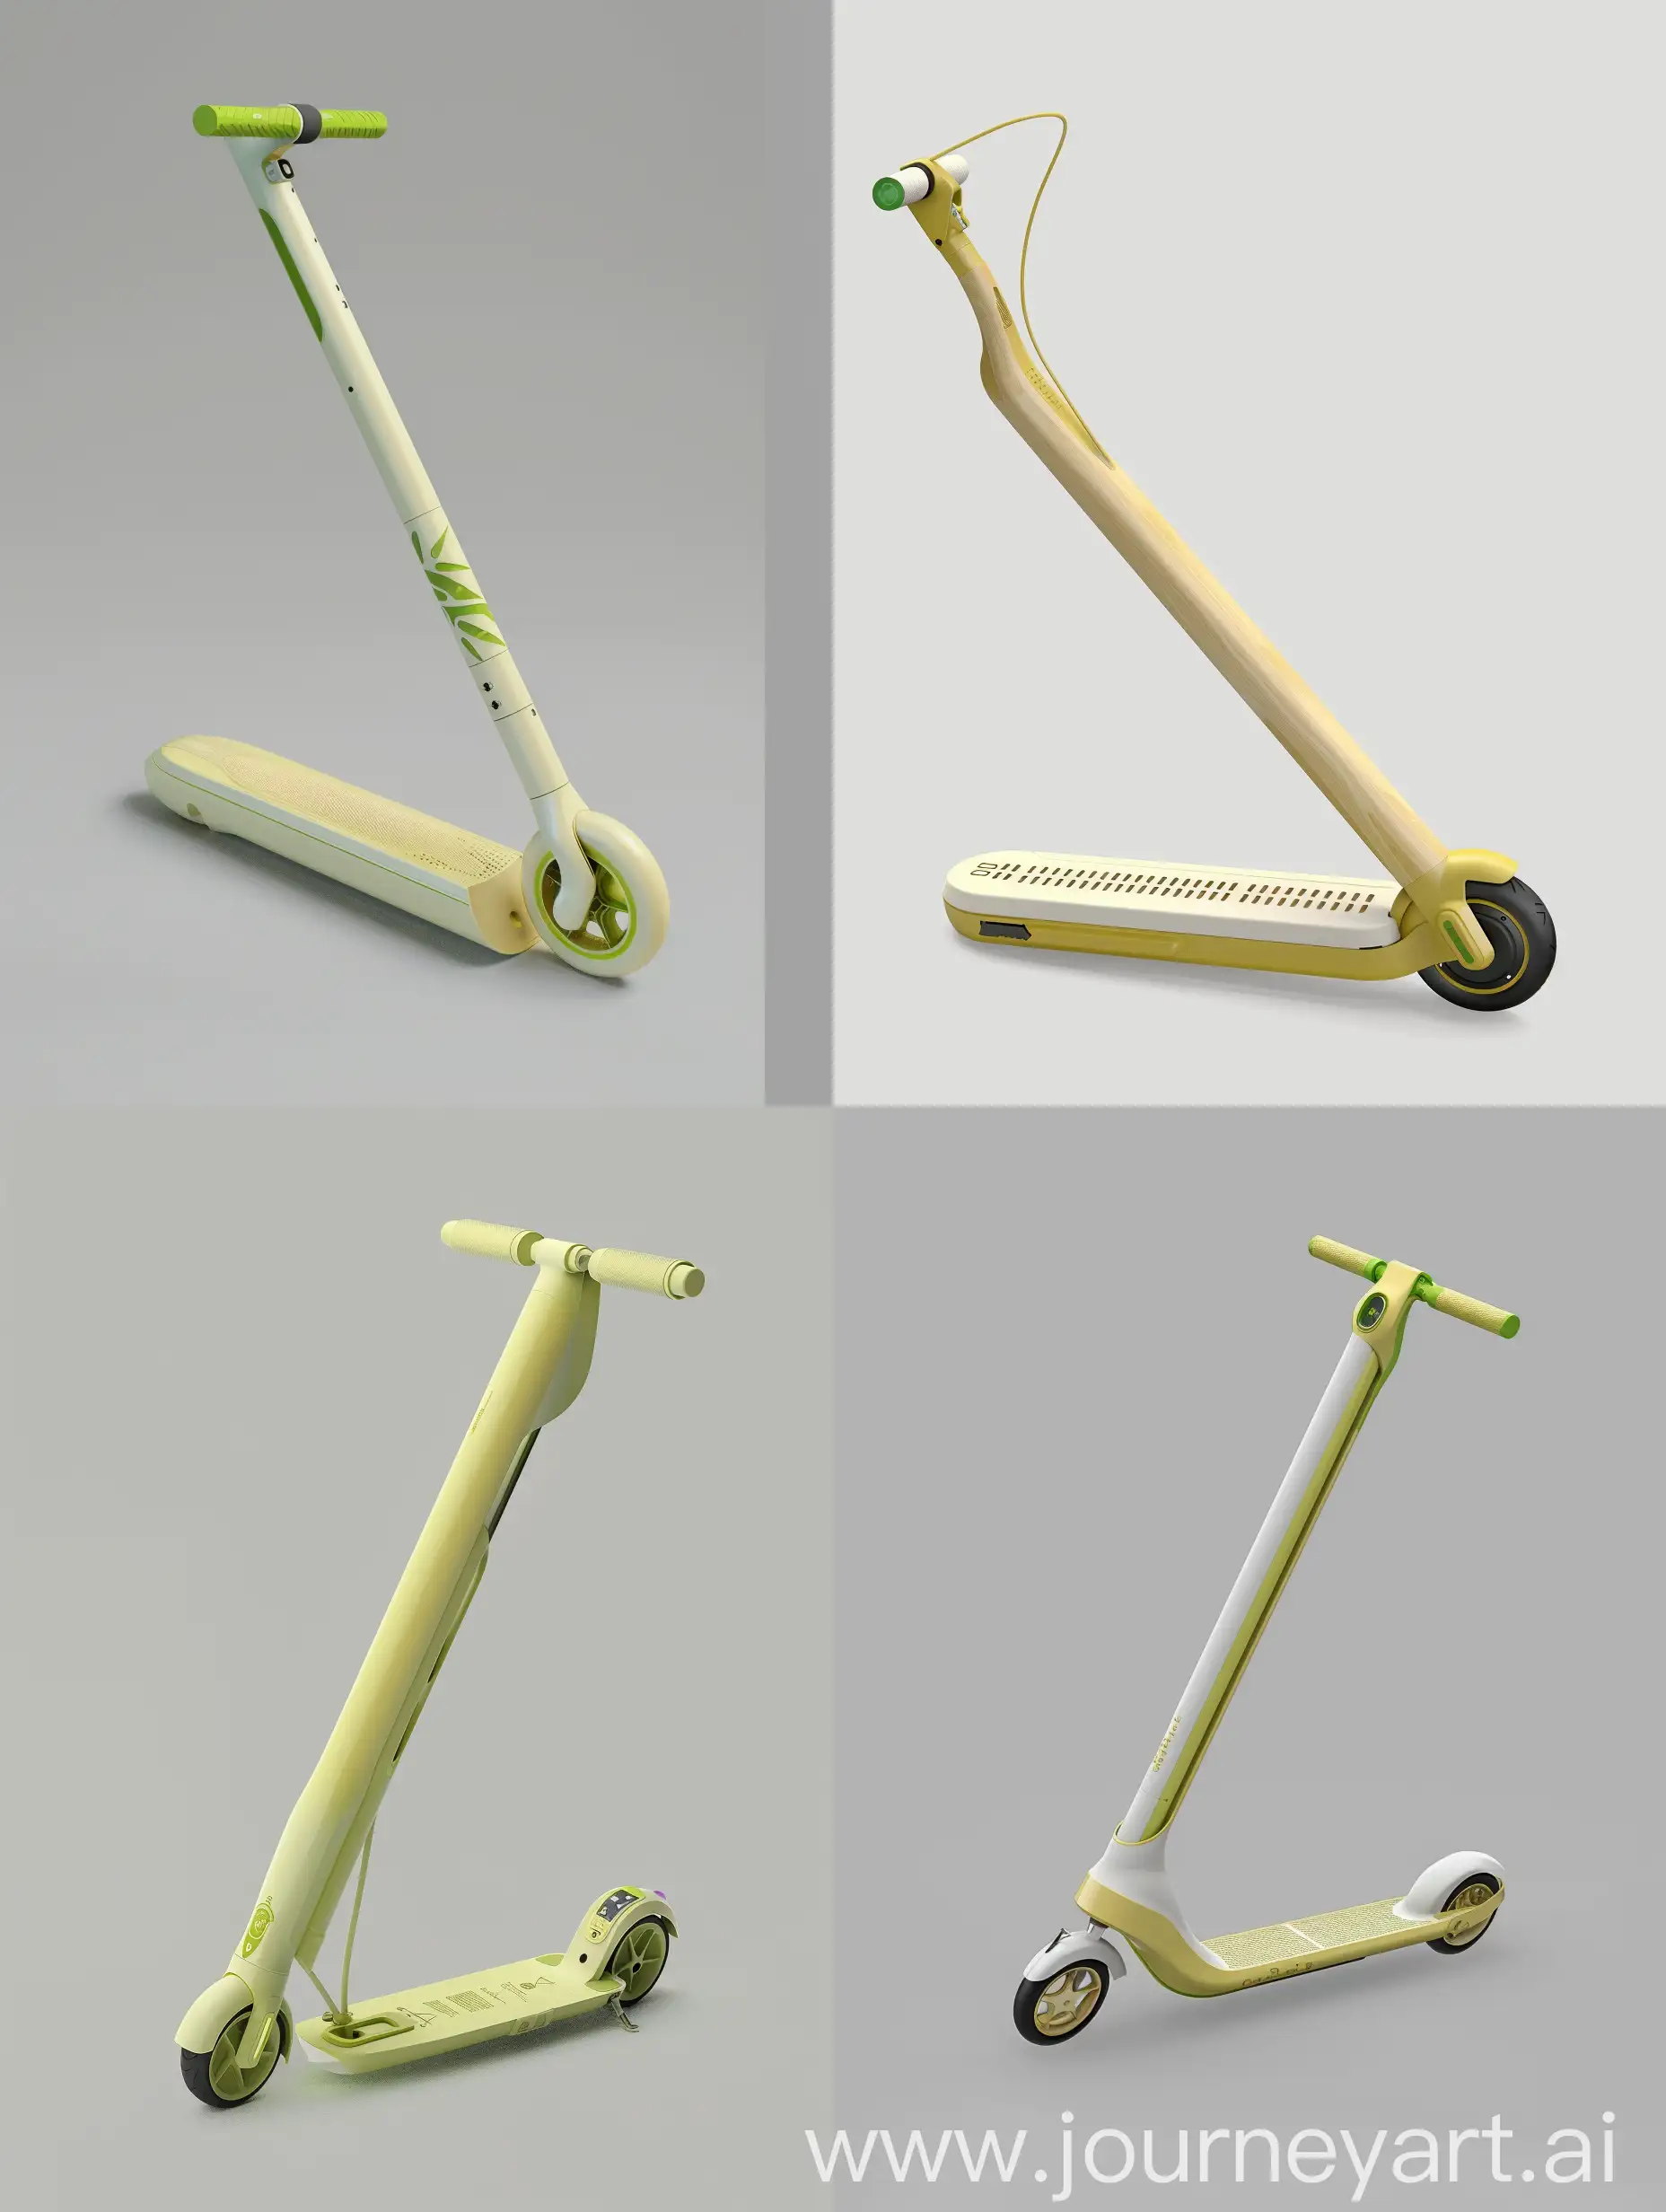 Design a  futuristic, foldable eco-friendly adulalt size electric scooter for young people inspired by the characteristics and symbolism of bamboo. The scooter features sleek, smooth curves with a matte warm white finish and slight transparency, accented with green tones inspired by bamboo. The handle design is minimalistic and curved, inspired by bamboo leaves, with a subtle texture, made from durable composite materials. The footboard is a multi-segmented structure with a textured, non-slip surface, folding neatly into the main body.The scooter folds into a compact cylindrical shape with non-uniform cross-sections mimicking bamboo segments. The wheels are retractable, folding into the body via a spring-loaded and gear system inspired by the retraction mechanisms of turtle limbs, ensuring a smooth, unified form. The handles fold inward along precise hinge lines, inspired by the folding of insect wings and Mimosa pudica leaves, using spring-loaded or magnetic hinges.The scooter includes solar panels for sustainable charging and a kinetic energy recovery system. A small, integrated display on the handlebar shows the map, path, charge level, and weather conditions. The design emphasizes both form and function, suitable for urban commuting, highlighting eco-friendliness and innovation. Materials used are lightweight composites with a matte warm white and slightly transparent finish, accented with green tones. The handlebar features an integrated power button and a folding/unfolding button for ease of use, with the LED display centered for clear visibility. The overall design is clean, minimalistic, and inspired by the natural elegance and segmented structure of bamboo. The scooter also features customizable LED lights and mobile app integration for personalization and tracking of usage and environmental impact.